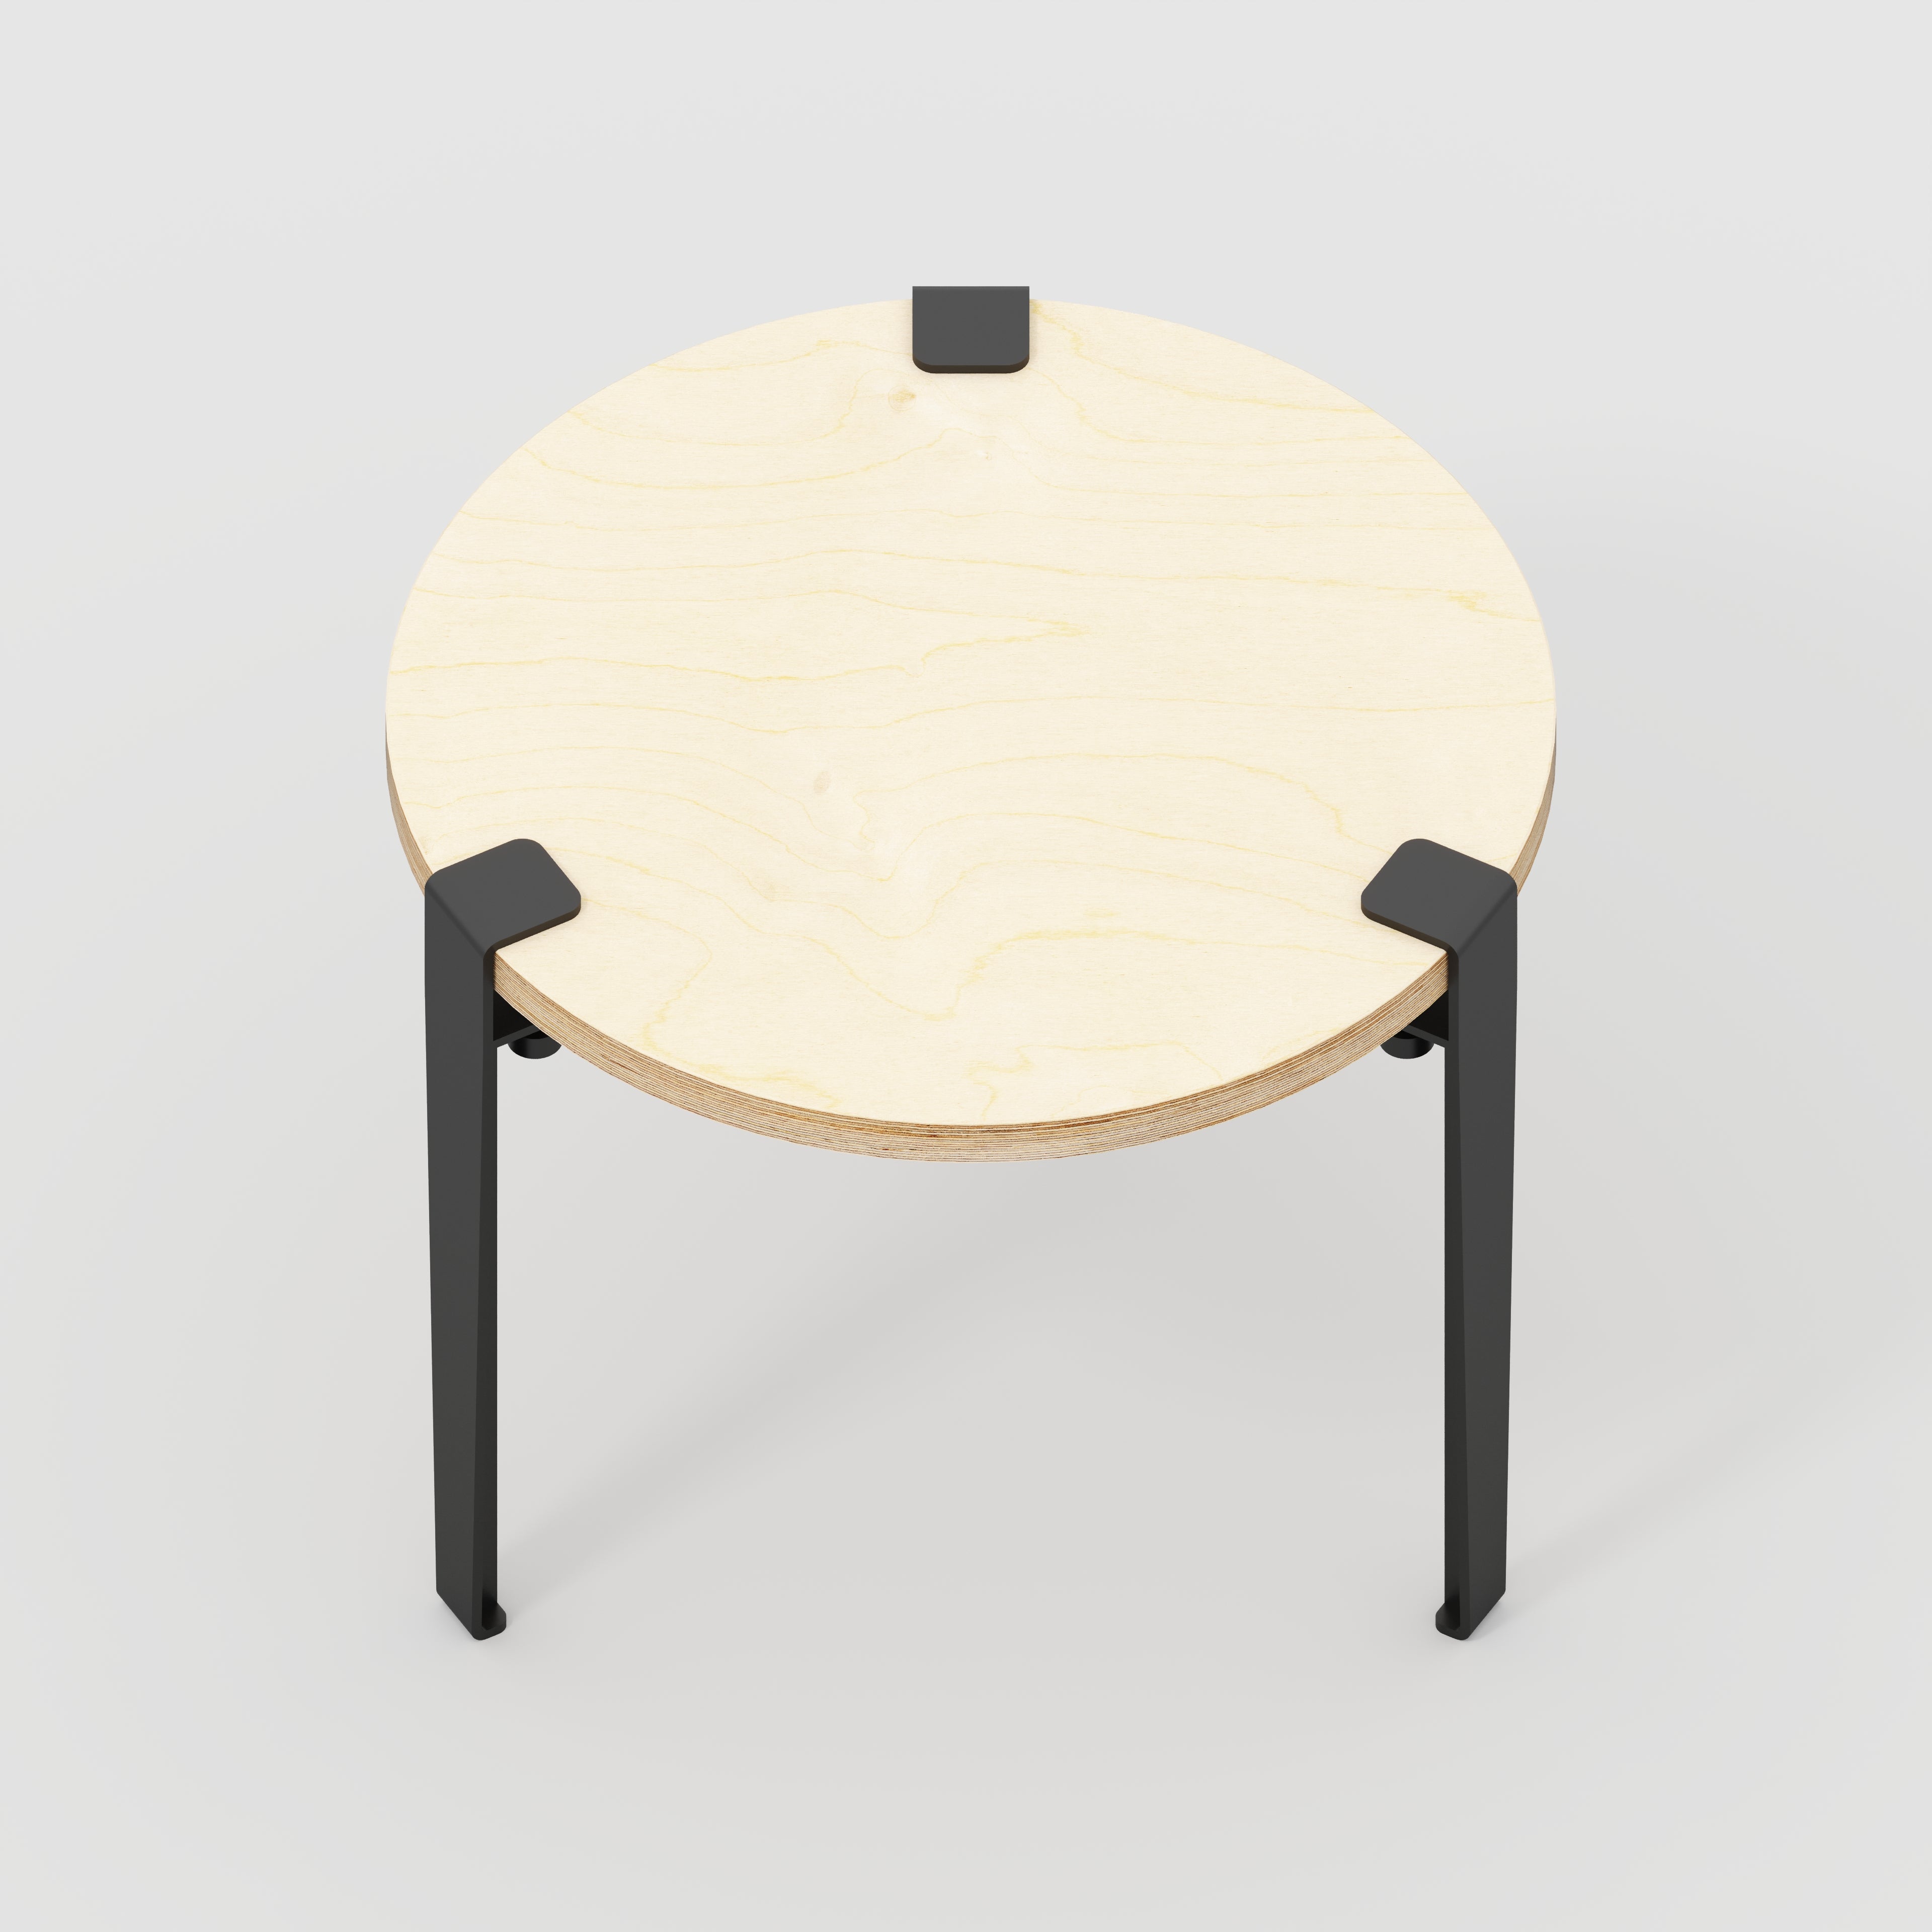 Round Side Table with Black Tiptoe Legs - Plywood Birch - 500(dia) x 430(h)